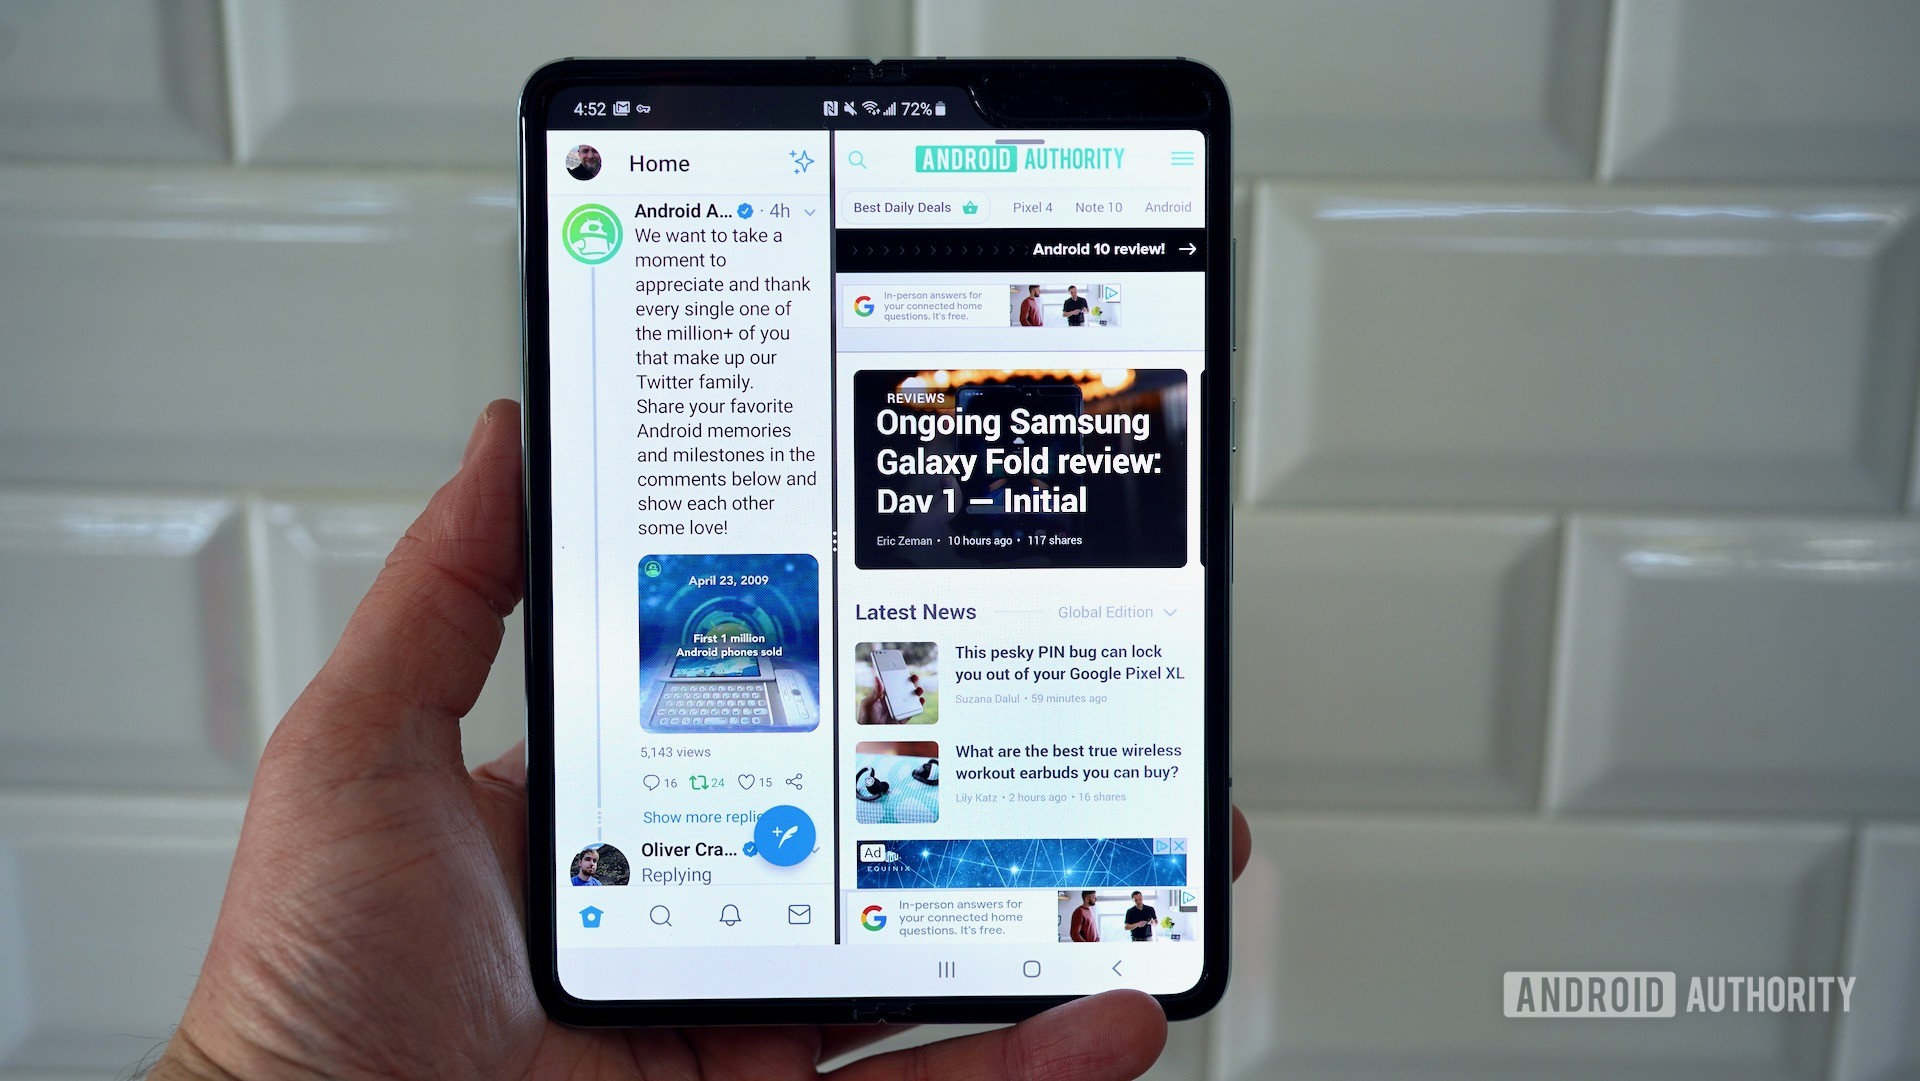 Samsung Galaxy Fold Review open while multitasking